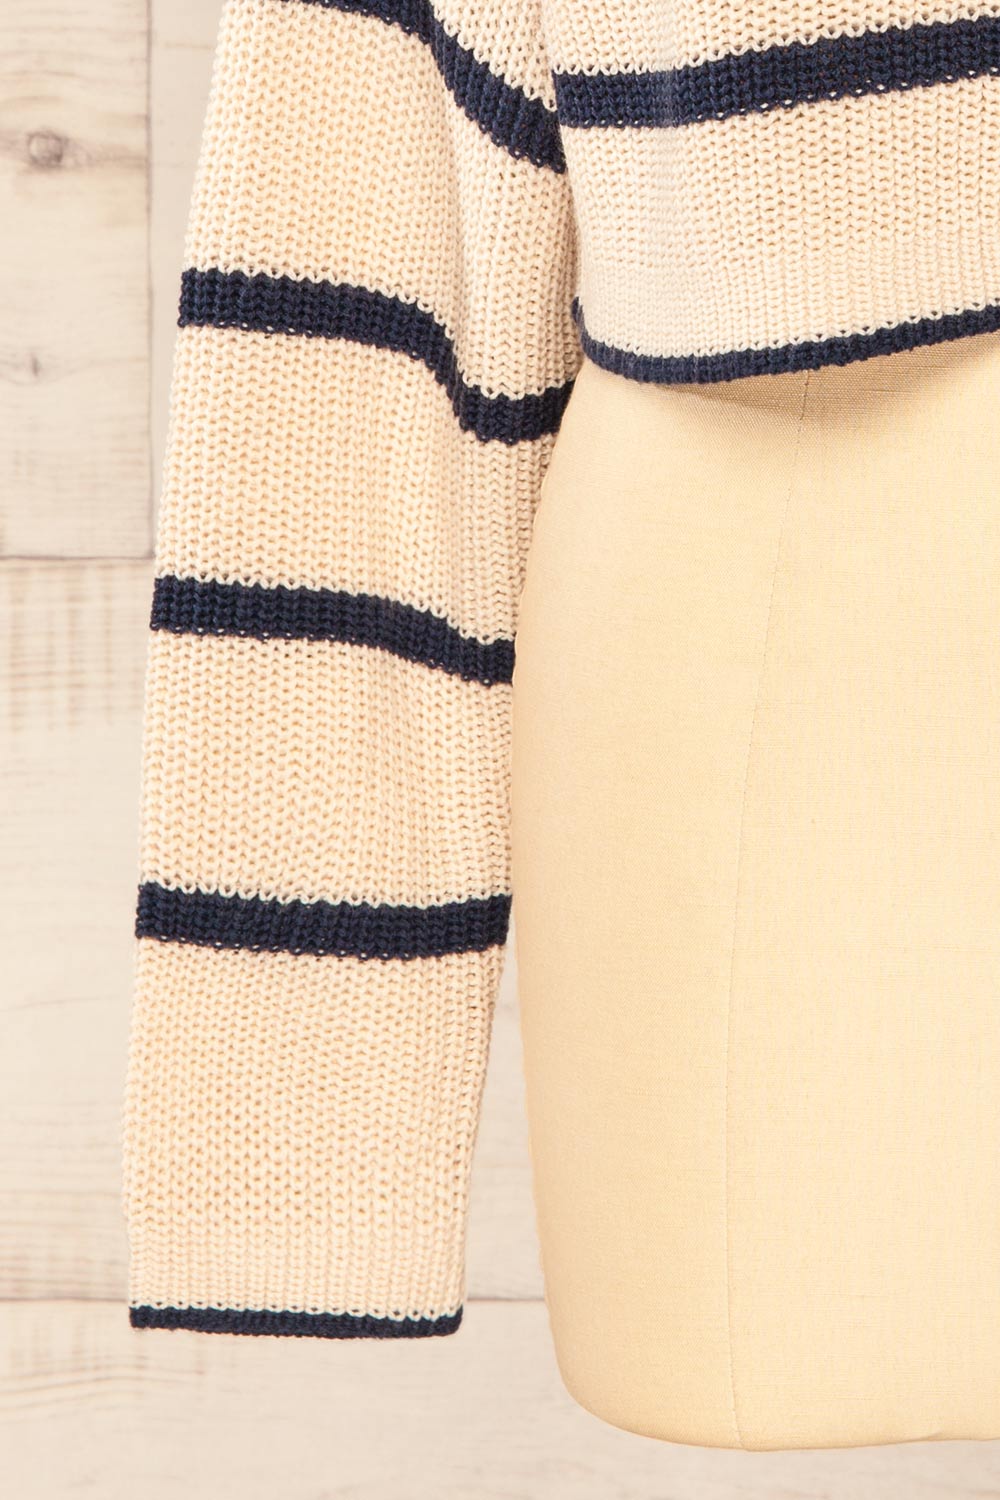 Arlette Cropped Striped Sweater